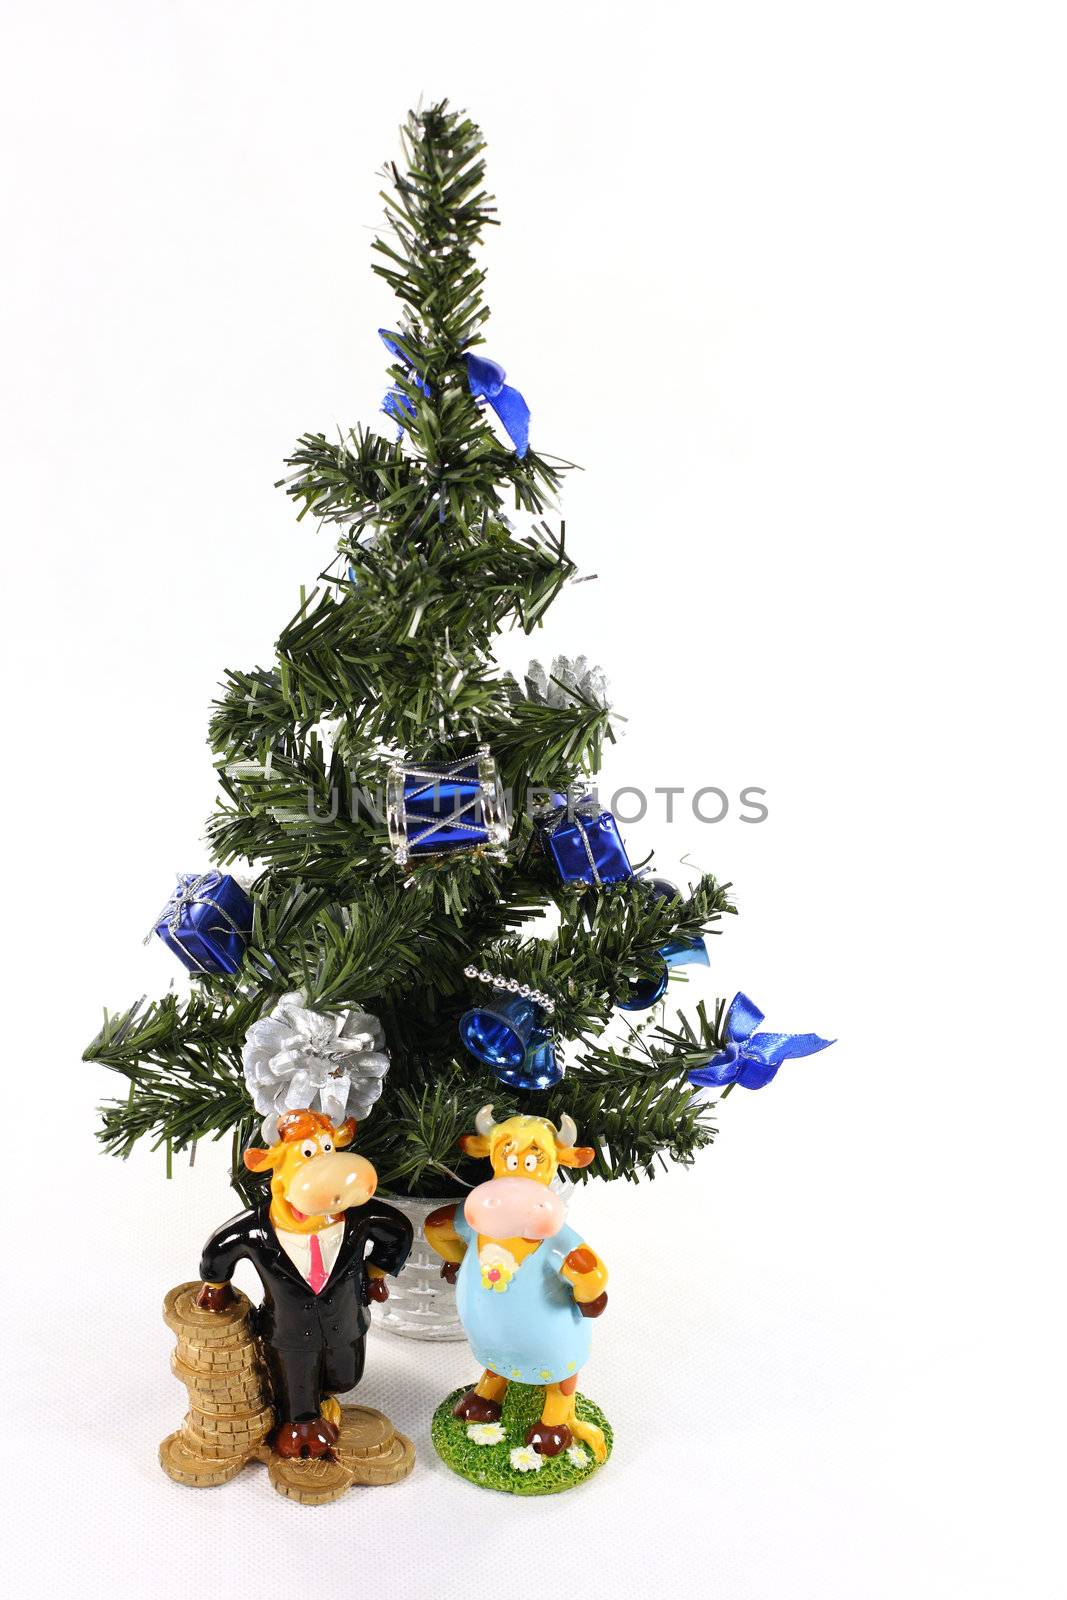 tree, holiday, cow, bull, money, finance, toys, tinsel, garland, ornament, decorate, new, year, christmas, winter, plant